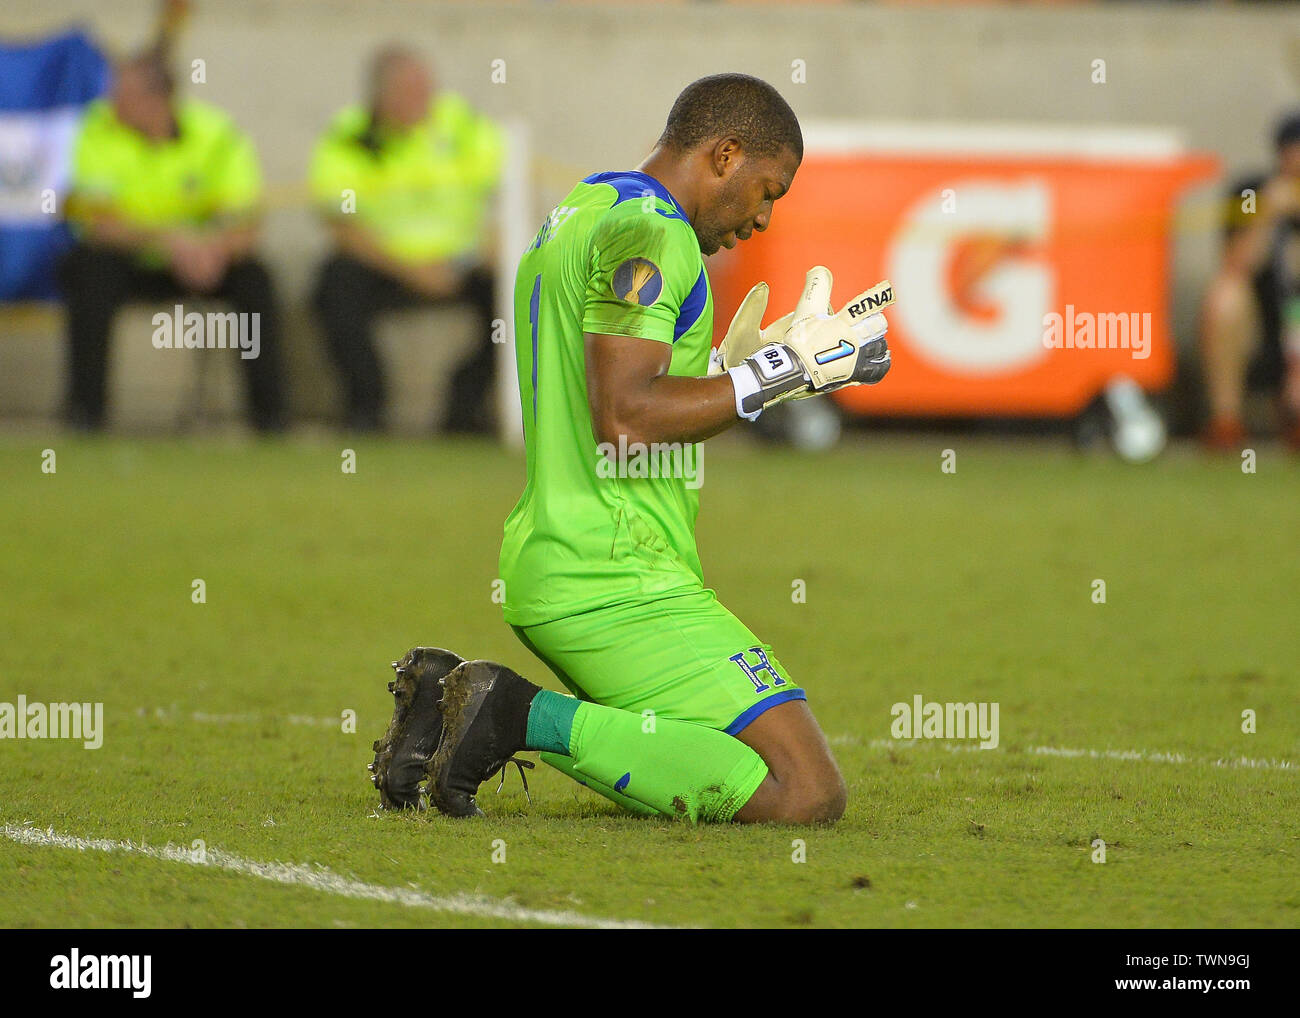 Houston, TX, USA. 21st June, 2019. Honduras goalkeeper, Luis Lopez (1), takes a moment to himself after the 2019 CONCACAF Gold Cup match between Honduras and Curacao, at BBVA Compass Stadium in Houston, TX. Mandatory Credit: Kevin Langley/Sports South Media/CSM/Alamy Live News Stock Photo